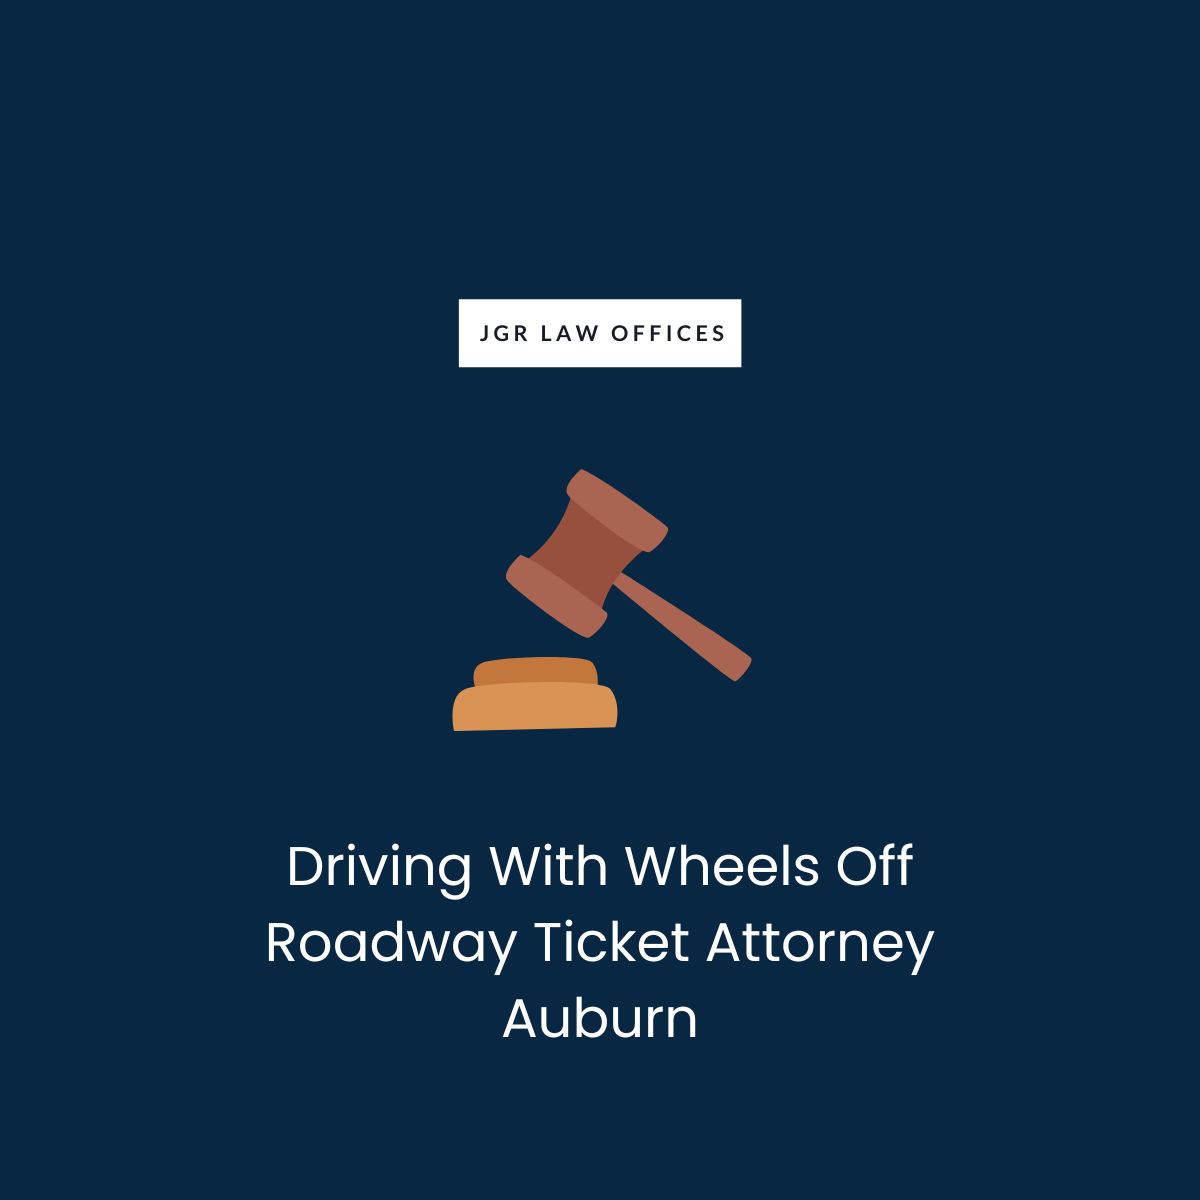 Driving With Wheels Off Roadway Ticket Attorney Auburn